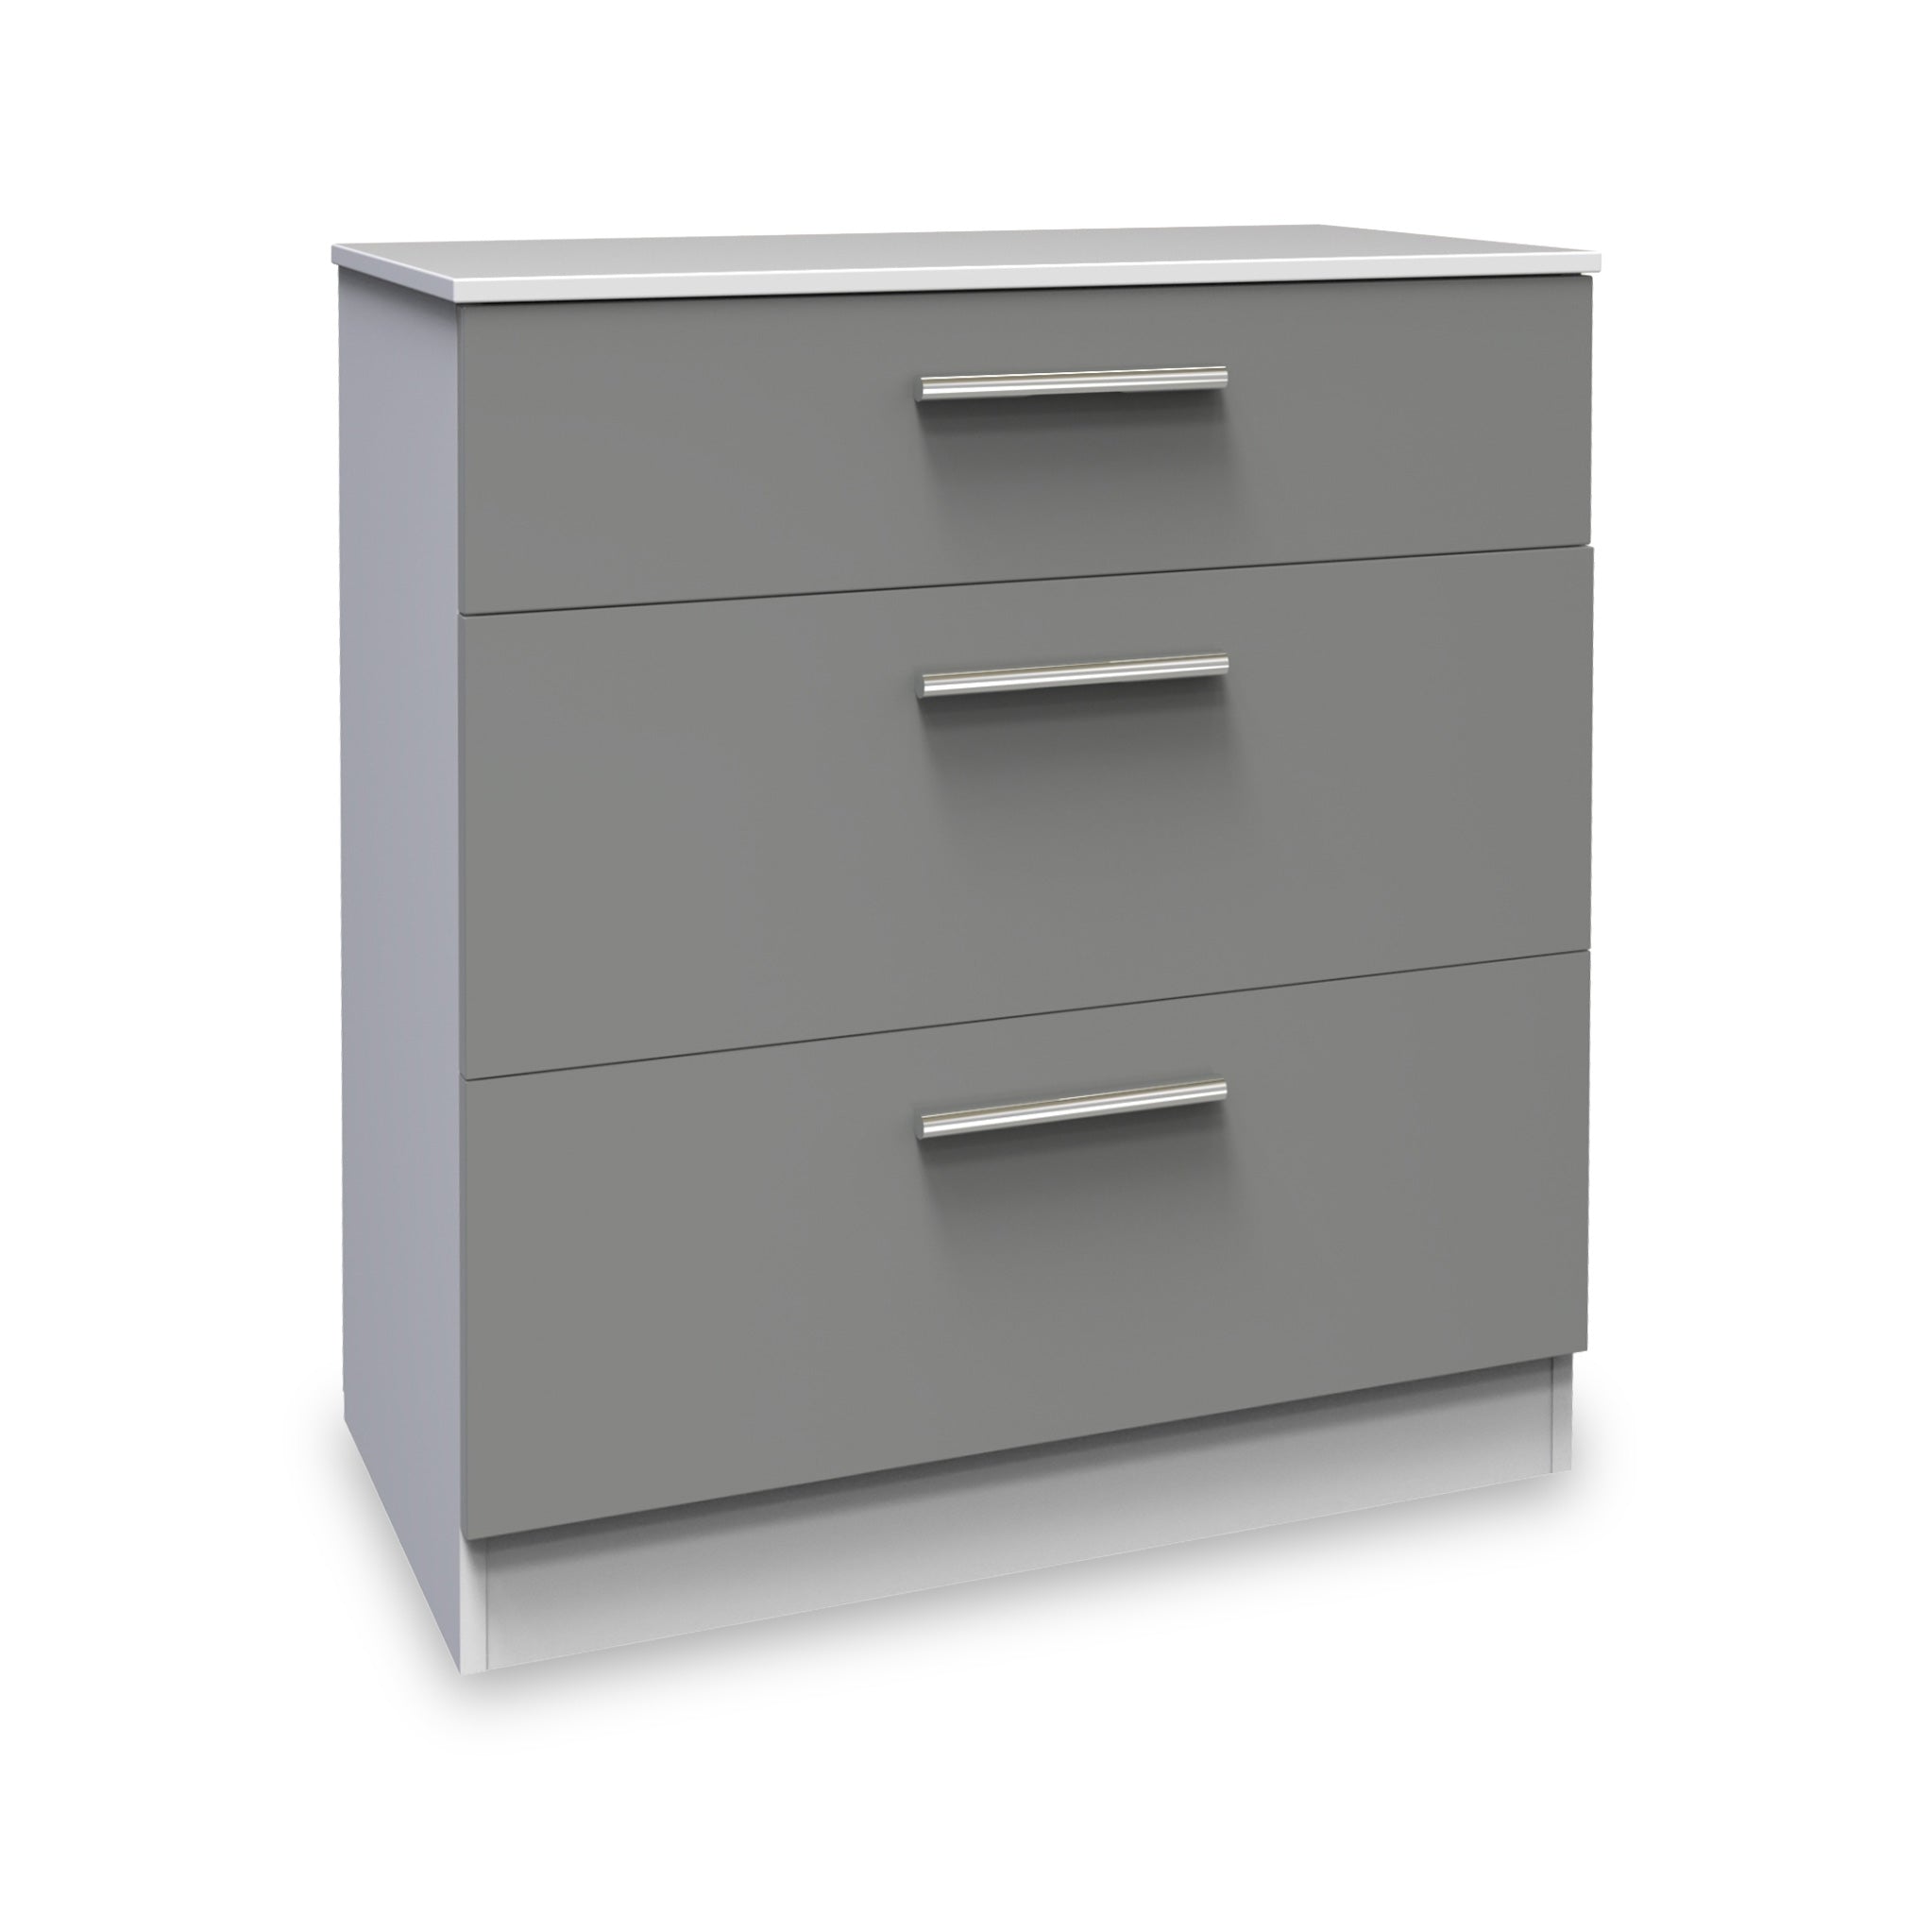 Blakely White Grey Two Tone 3 Drawer Deep Chest Roseland